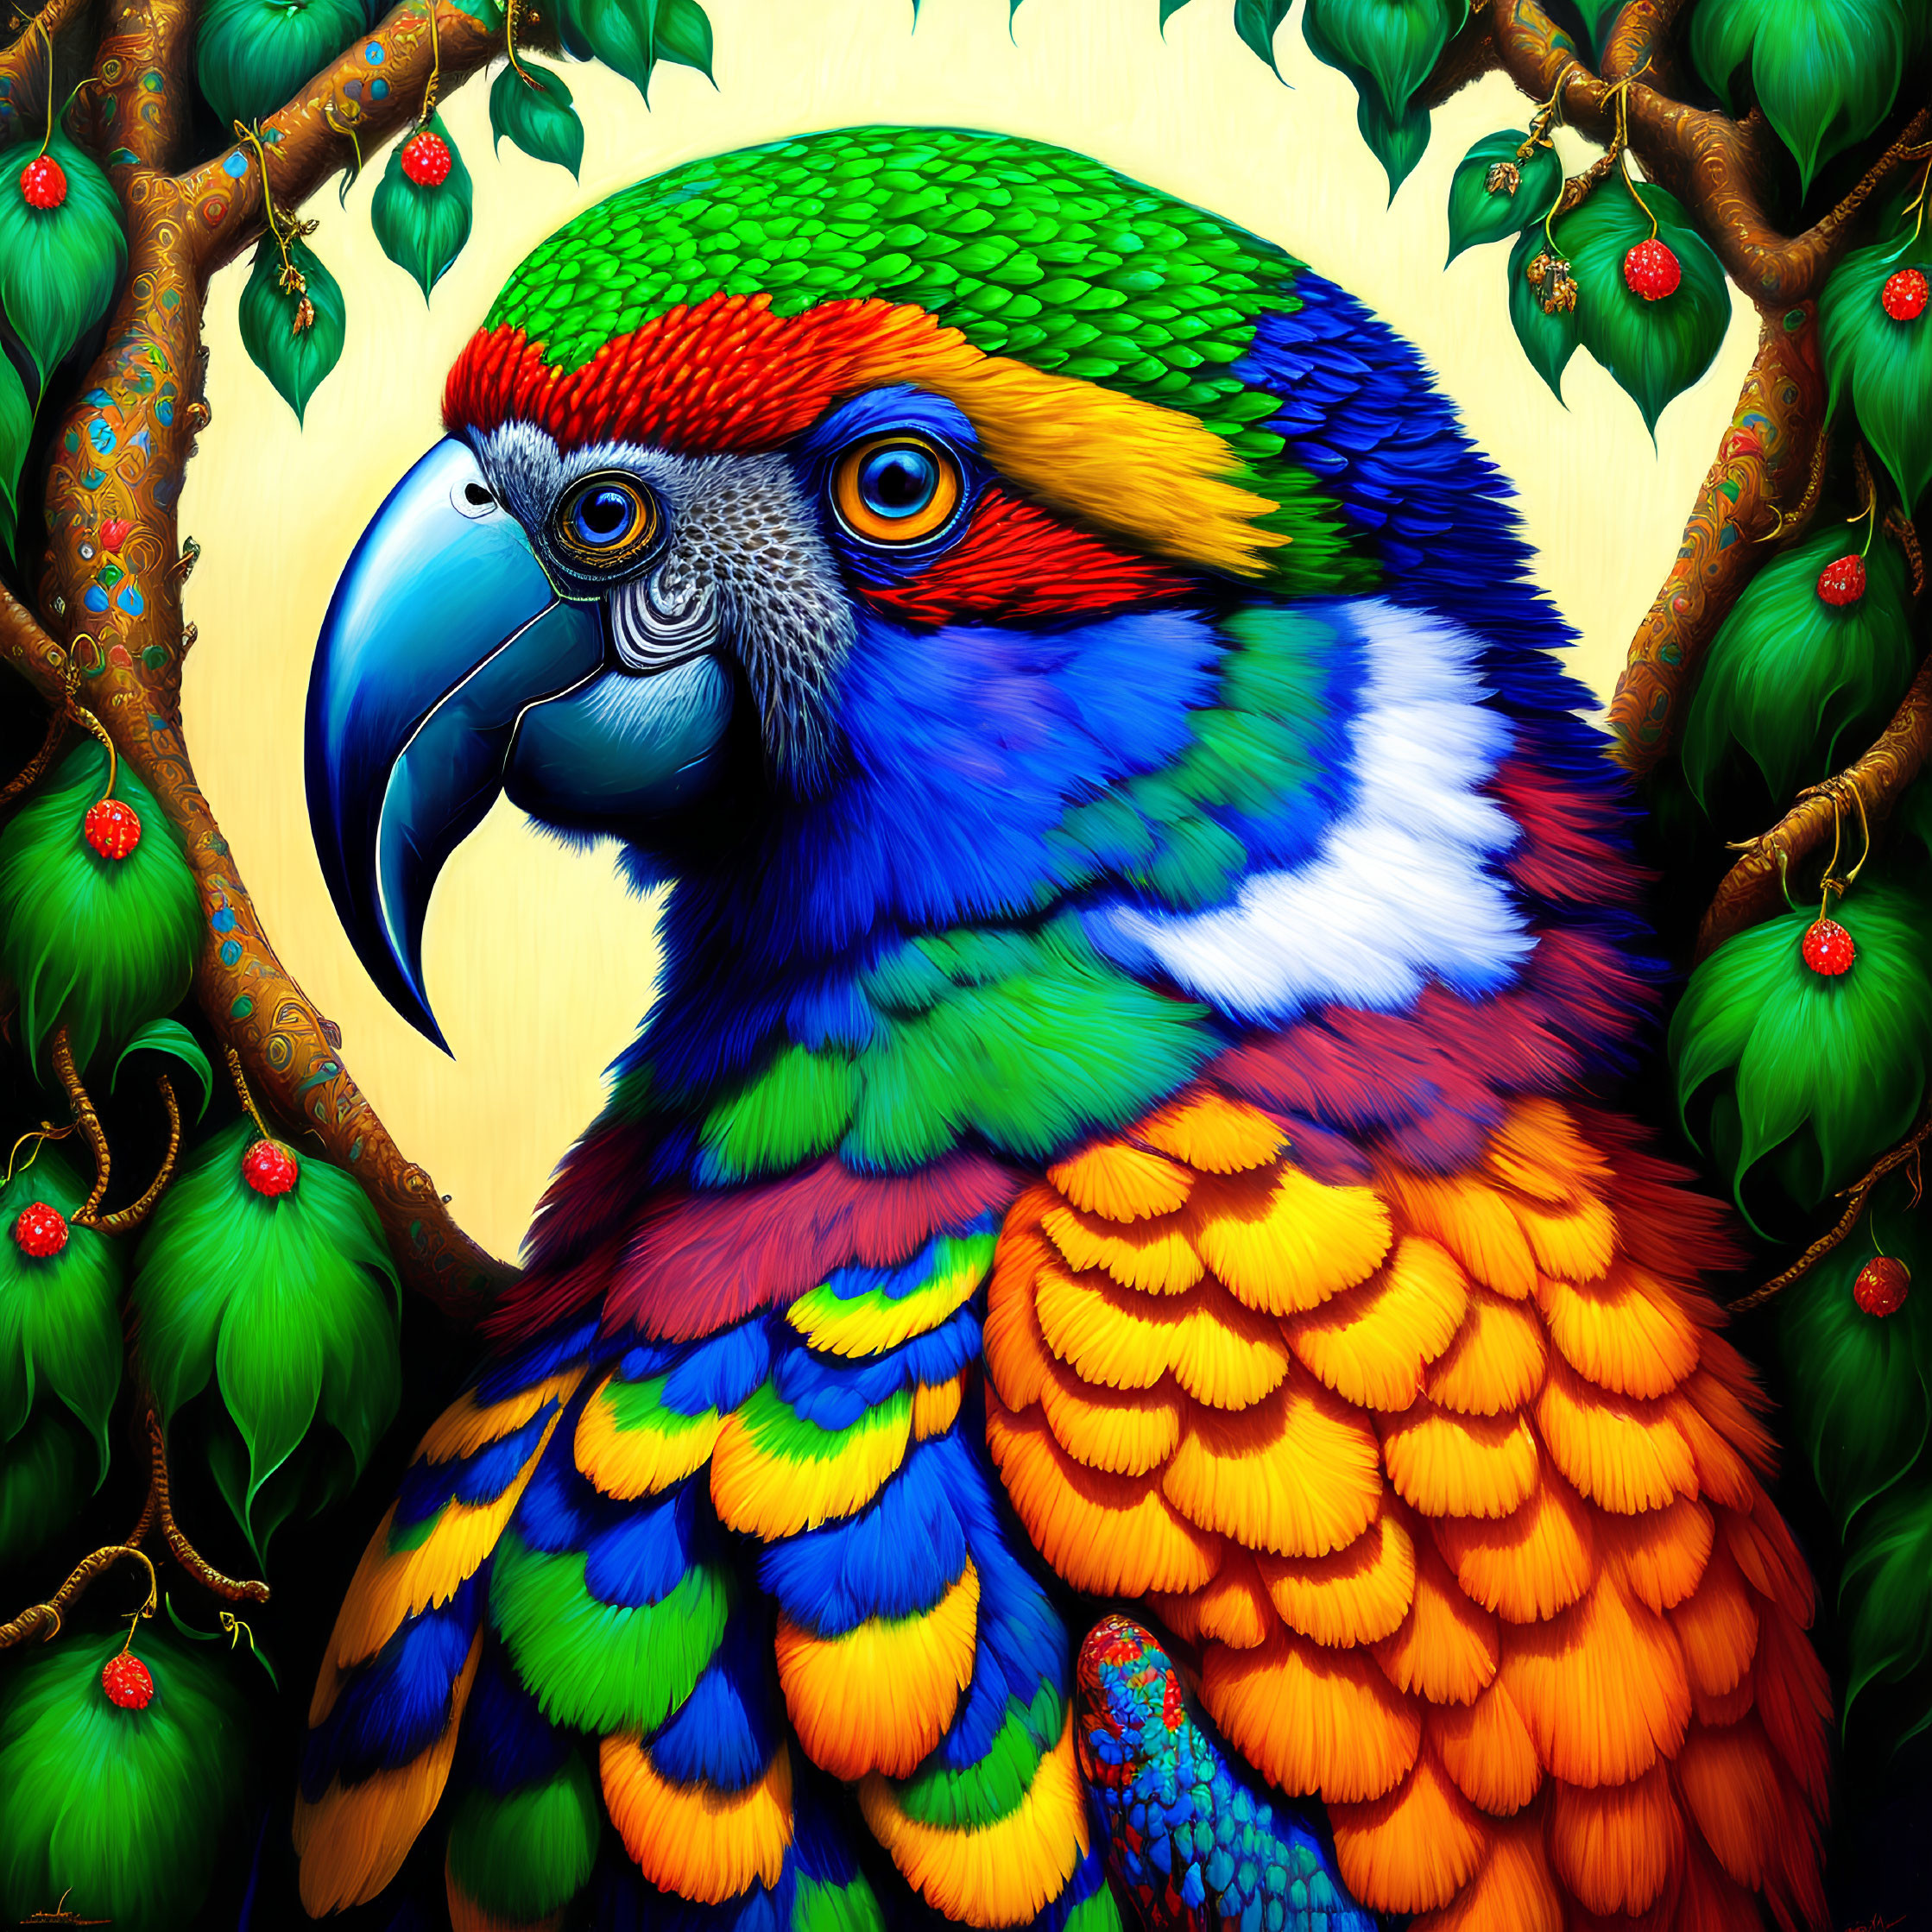 Colorful Parrot Illustration Among Green Foliage with Red Fruits